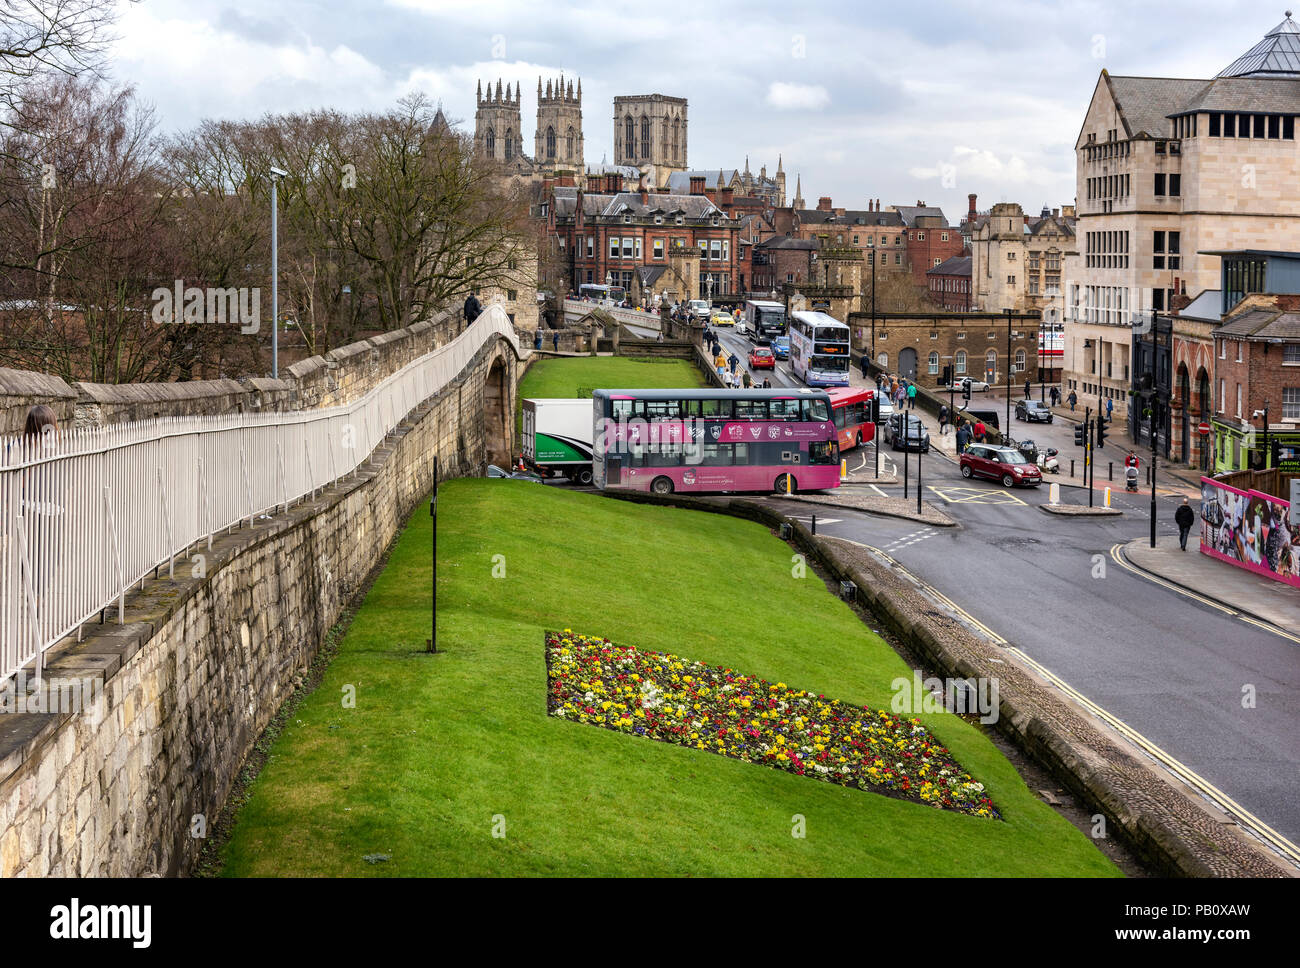 York Minster from the city walls Stock Photo